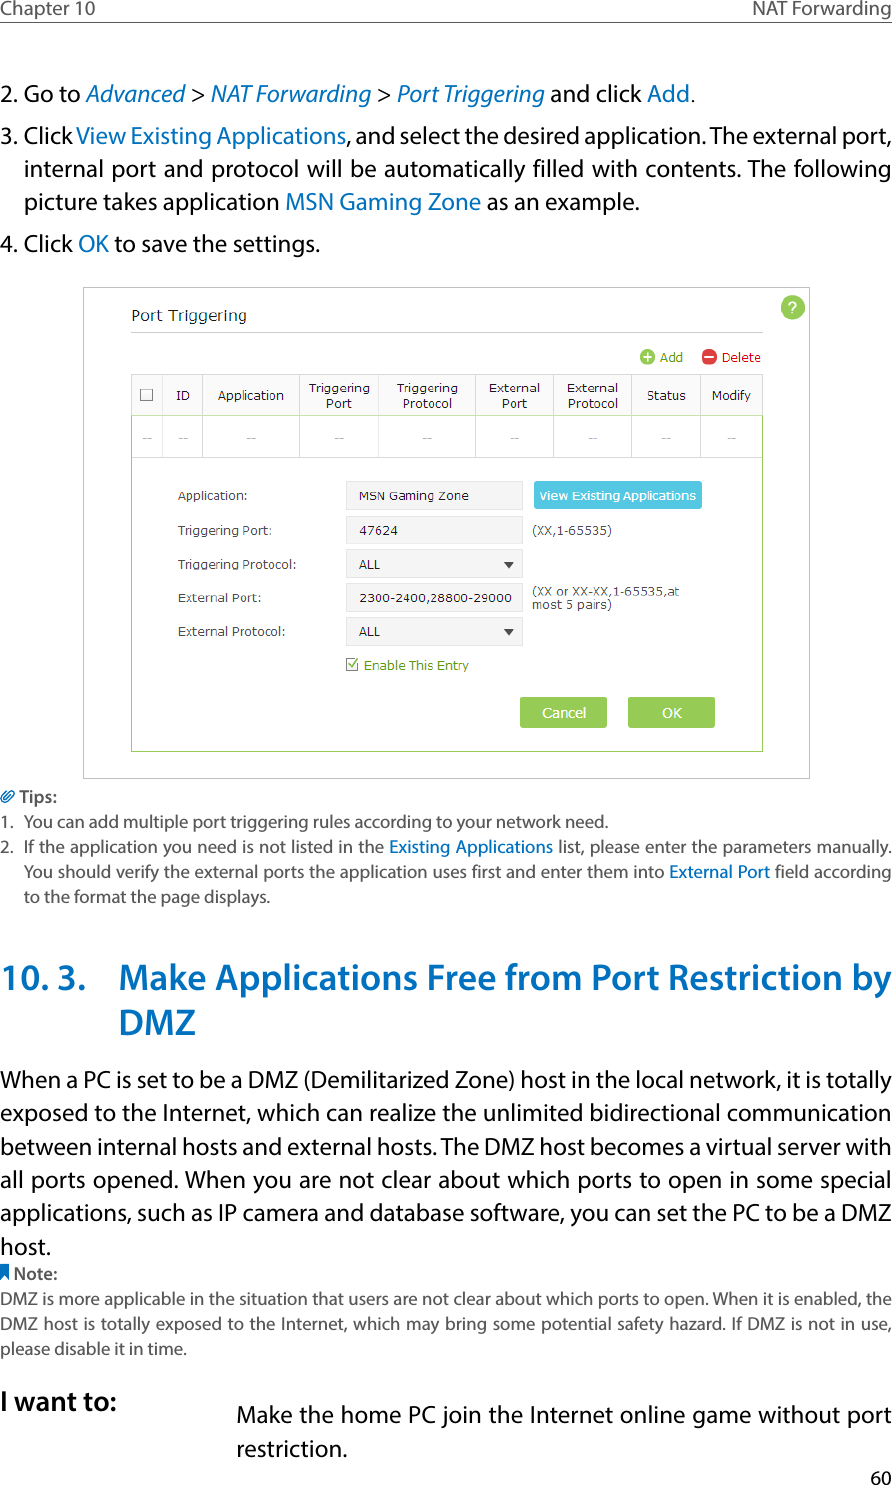 60Chapter 10 NAT Forwarding2. Go to Advanced &gt; NAT Forwarding &gt; Port Triggering and click Add.3. Click View Existing Applications, and select the desired application. The external port, internal port and protocol will be automatically filled with contents. The following picture takes application MSN Gaming Zone as an example.4. Click OK to save the settings.Tips:1.  You can add multiple port triggering rules according to your network need.2.  If the application you need is not listed in the Existing Applications list, please enter the parameters manually. You should verify the external ports the application uses first and enter them into External Port field according to the format the page displays.10. 3.  Make Applications Free from Port Restriction by DMZWhen a PC is set to be a DMZ (Demilitarized Zone) host in the local network, it is totally exposed to the Internet, which can realize the unlimited bidirectional communication between internal hosts and external hosts. The DMZ host becomes a virtual server with all ports opened. When you are not clear about which ports to open in some special applications, such as IP camera and database software, you can set the PC to be a DMZ host.Note:DMZ is more applicable in the situation that users are not clear about which ports to open. When it is enabled, the DMZ host is totally exposed to the Internet, which may bring some potential safety hazard. If DMZ is not in use, please disable it in time.Make the home PC join the Internet online game without port restriction.I want to: